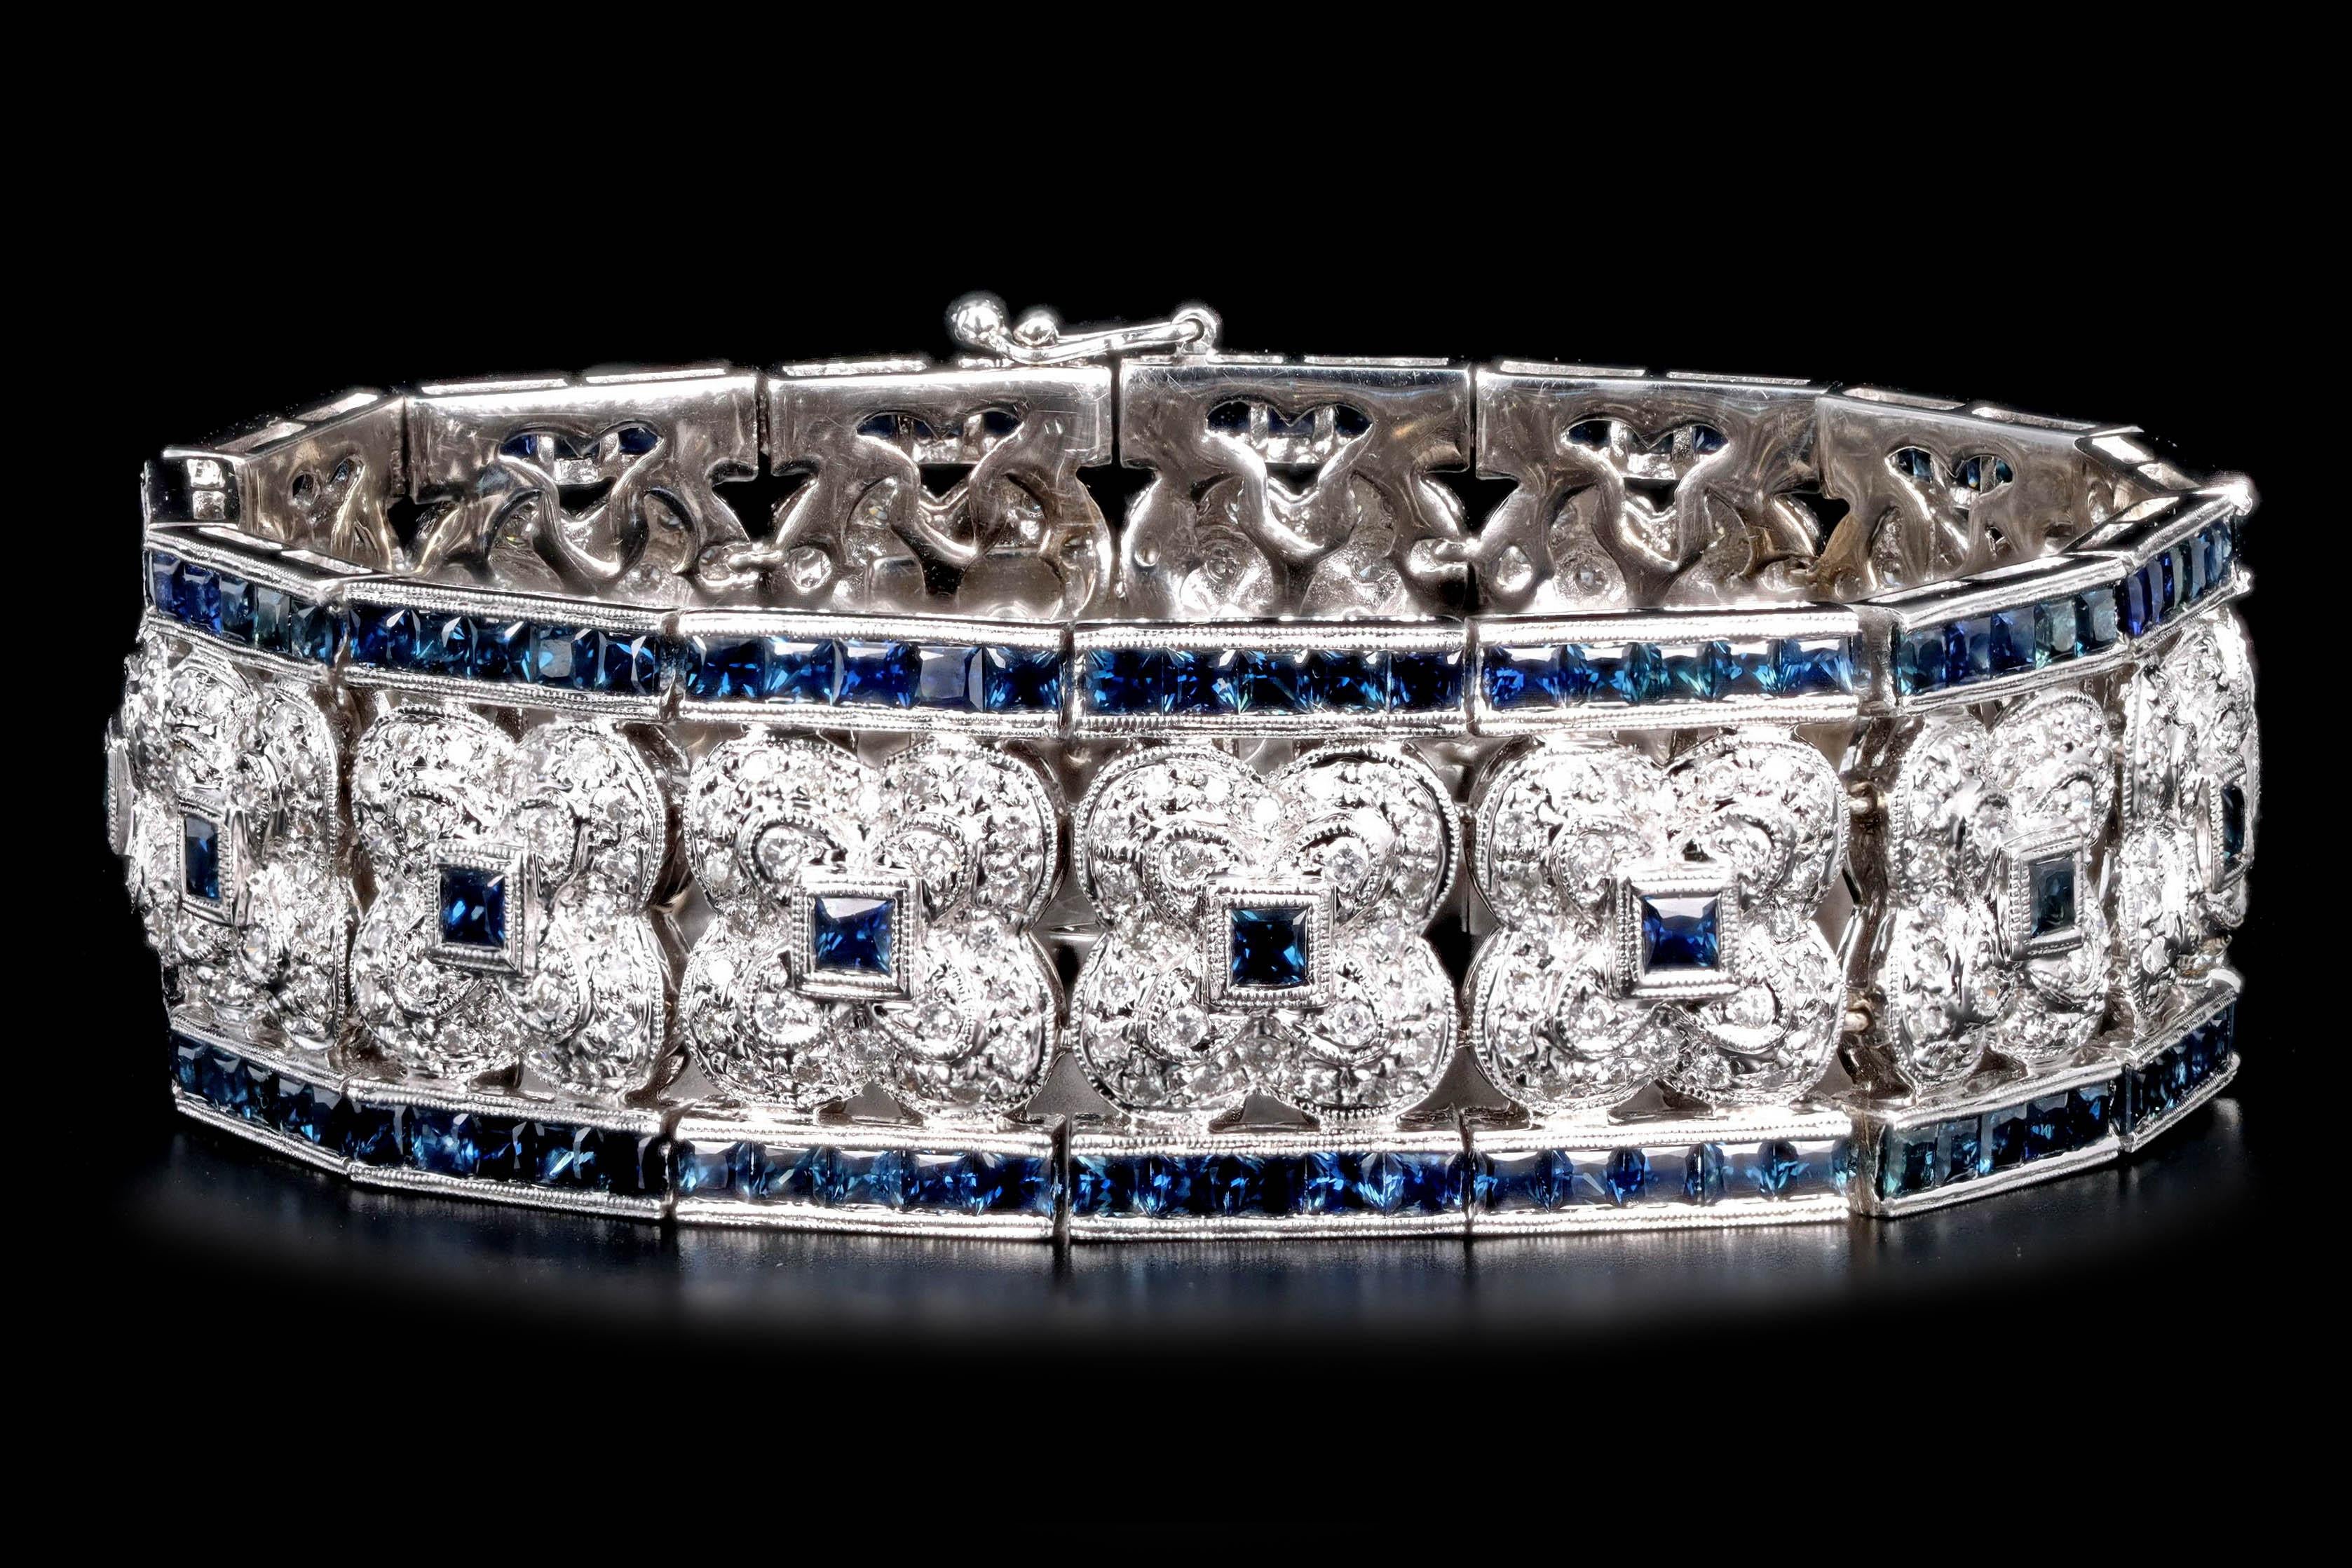 Era: Modern

Composition: 18K White Gold

Primary Stone: One Hundred Sixty Five Square Natural Sapphires

Carat Weight: Approximately 11 Carats in Total

Accent Stone: Three Hundred Sixty Round Brilliant Cut Diamonds

Carat Weight: Approximately 3.5